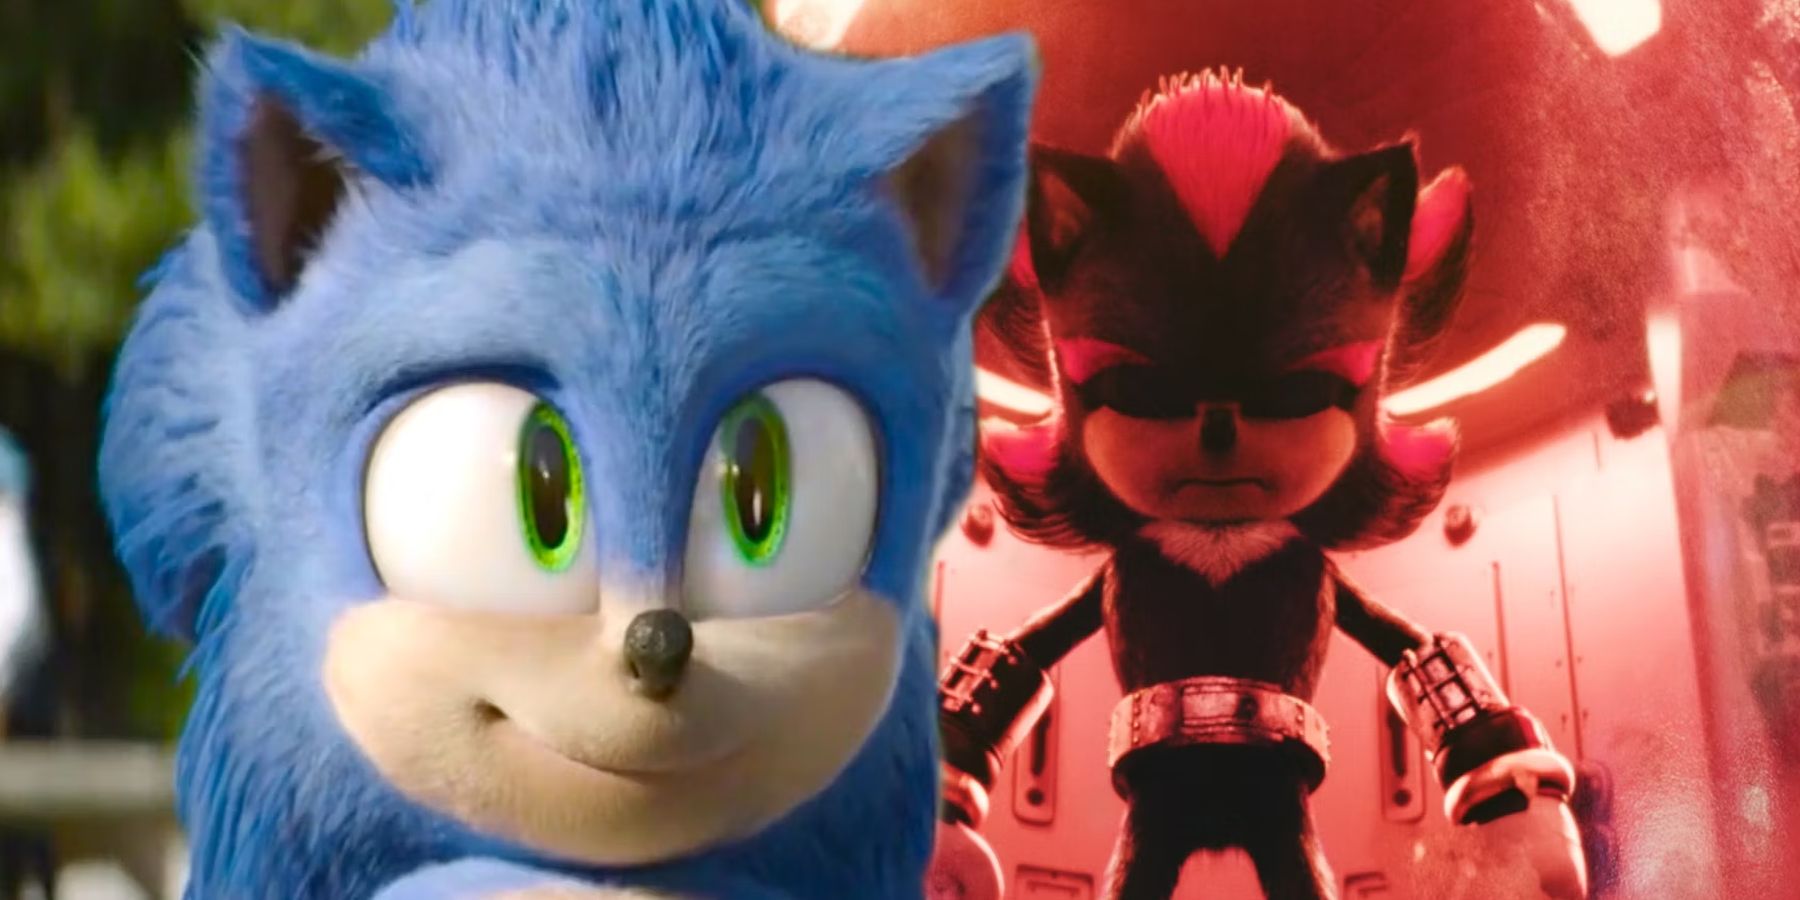 sonic-the-hedgehog-3-star-confirms-major-production-update-in-bts-photo